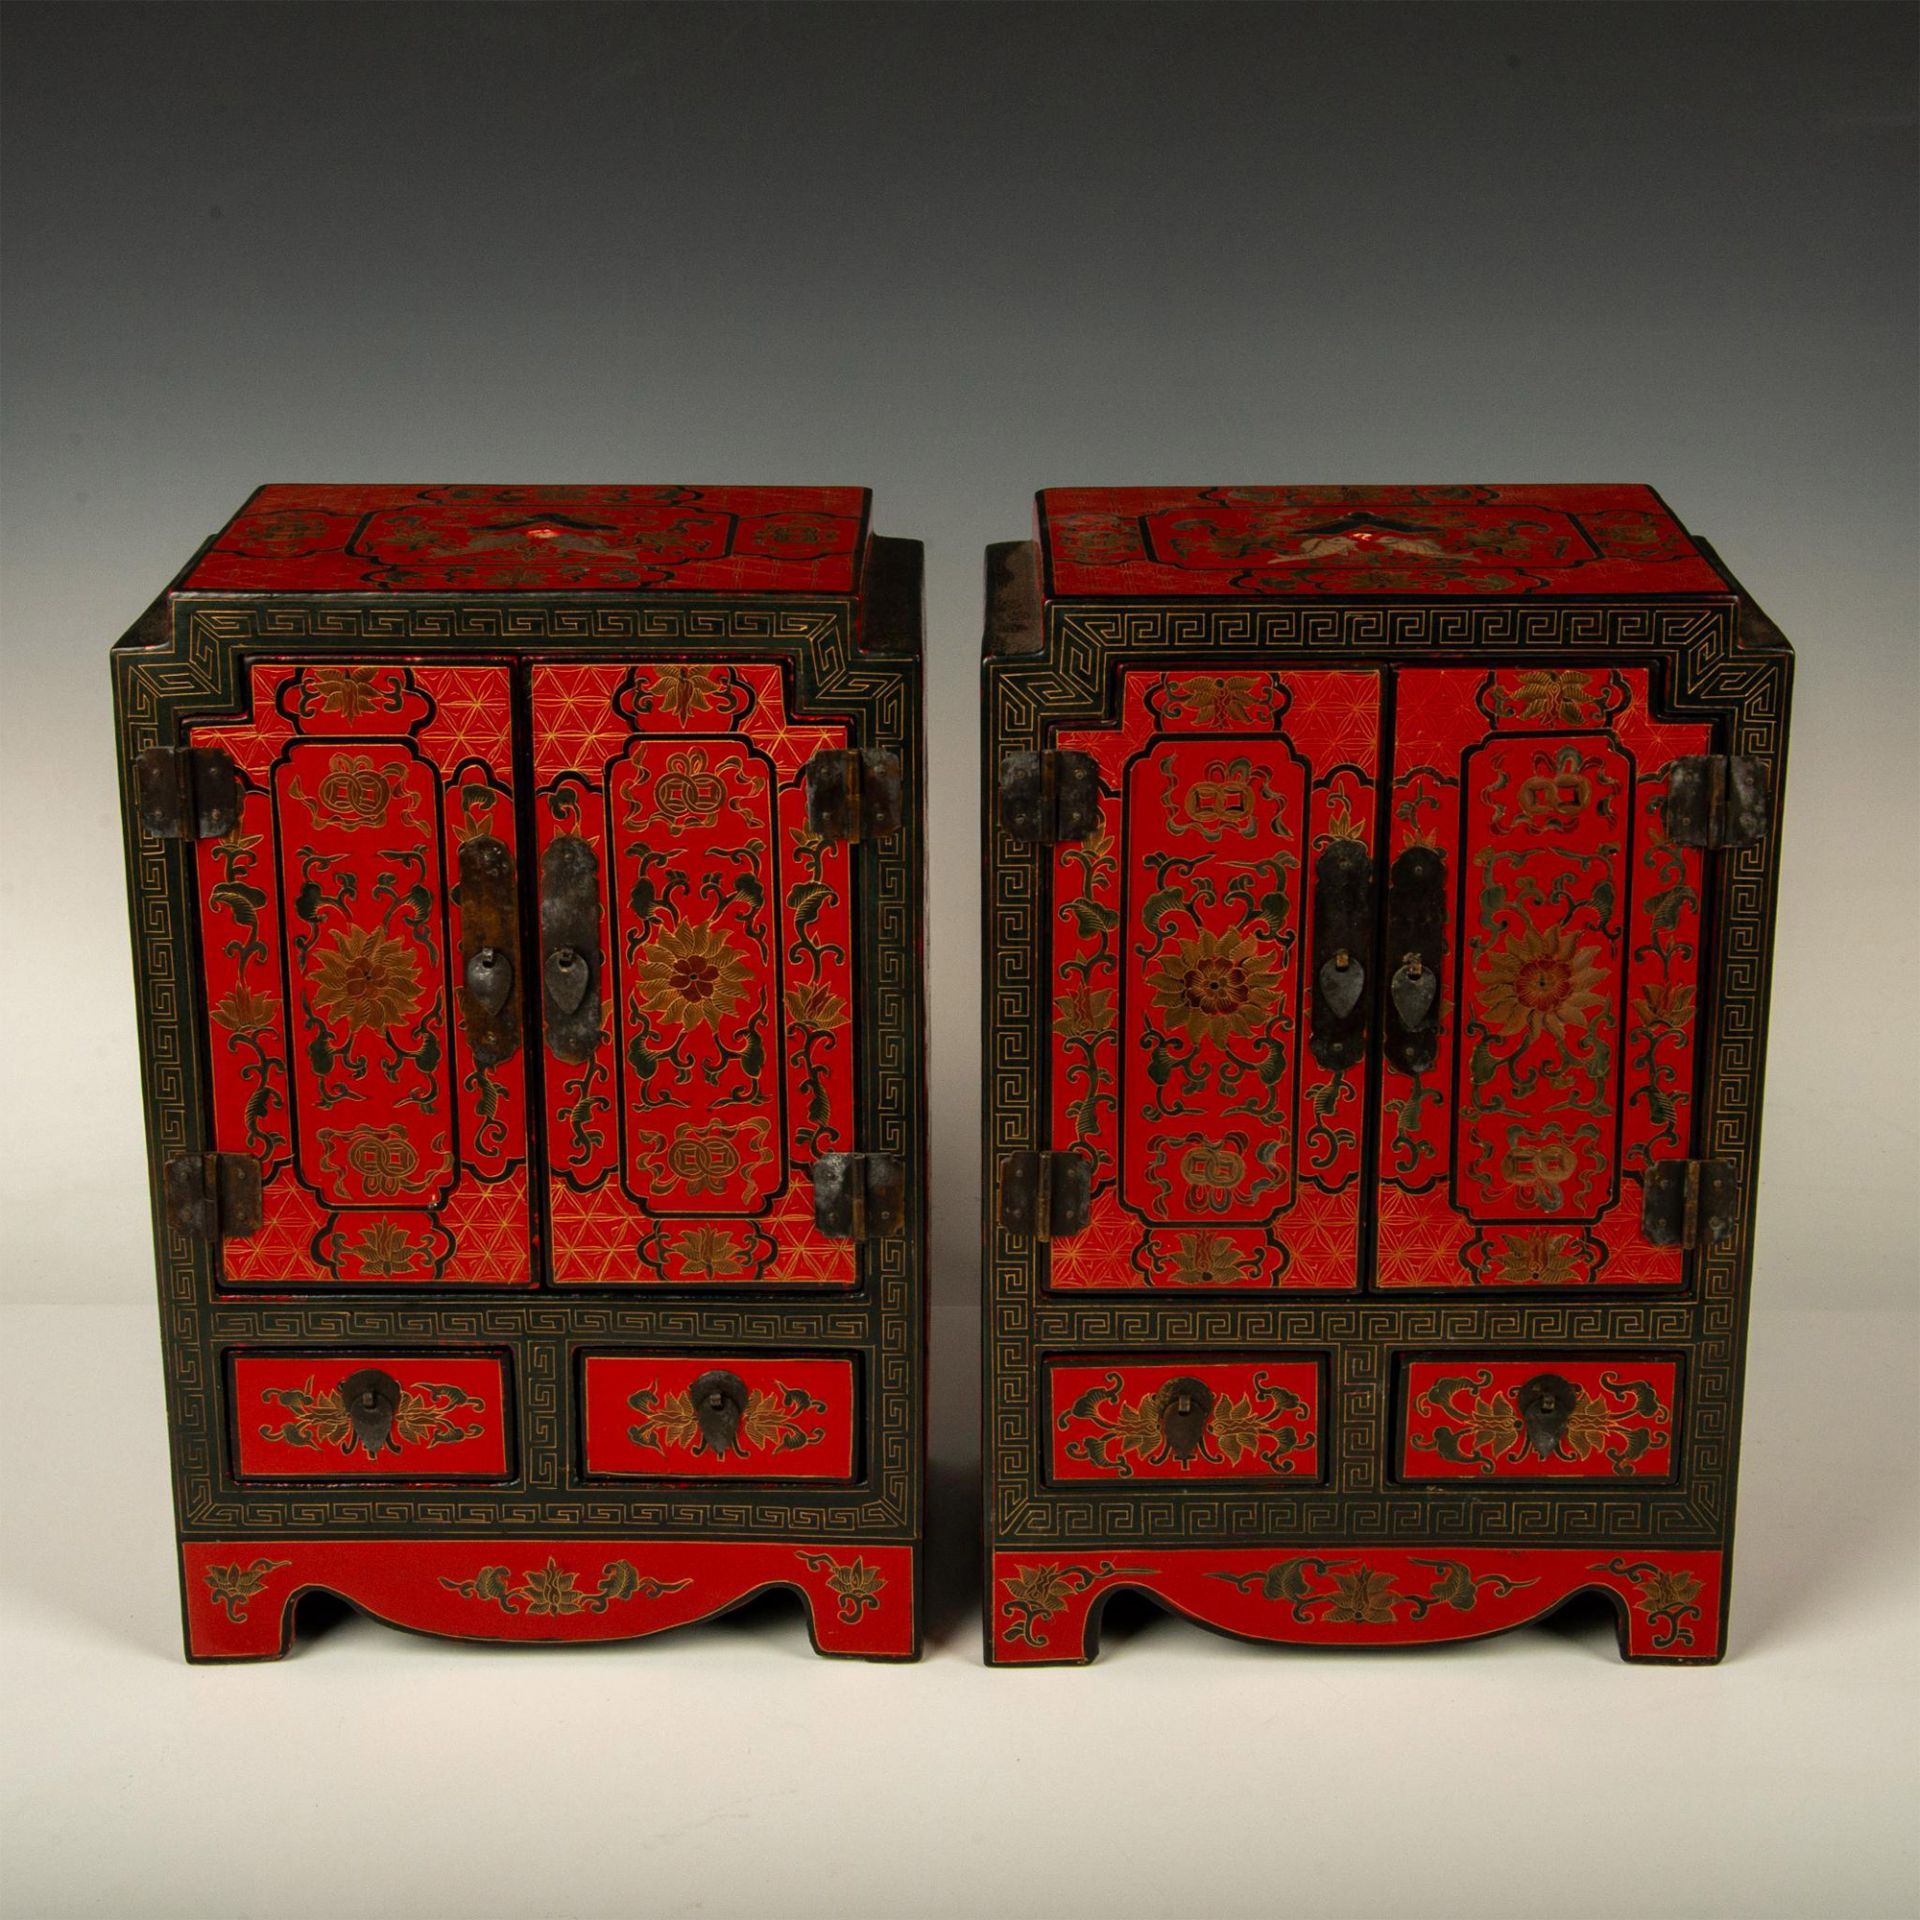 Pair of Antique Chinese Lacquer Cabinets - Image 2 of 6